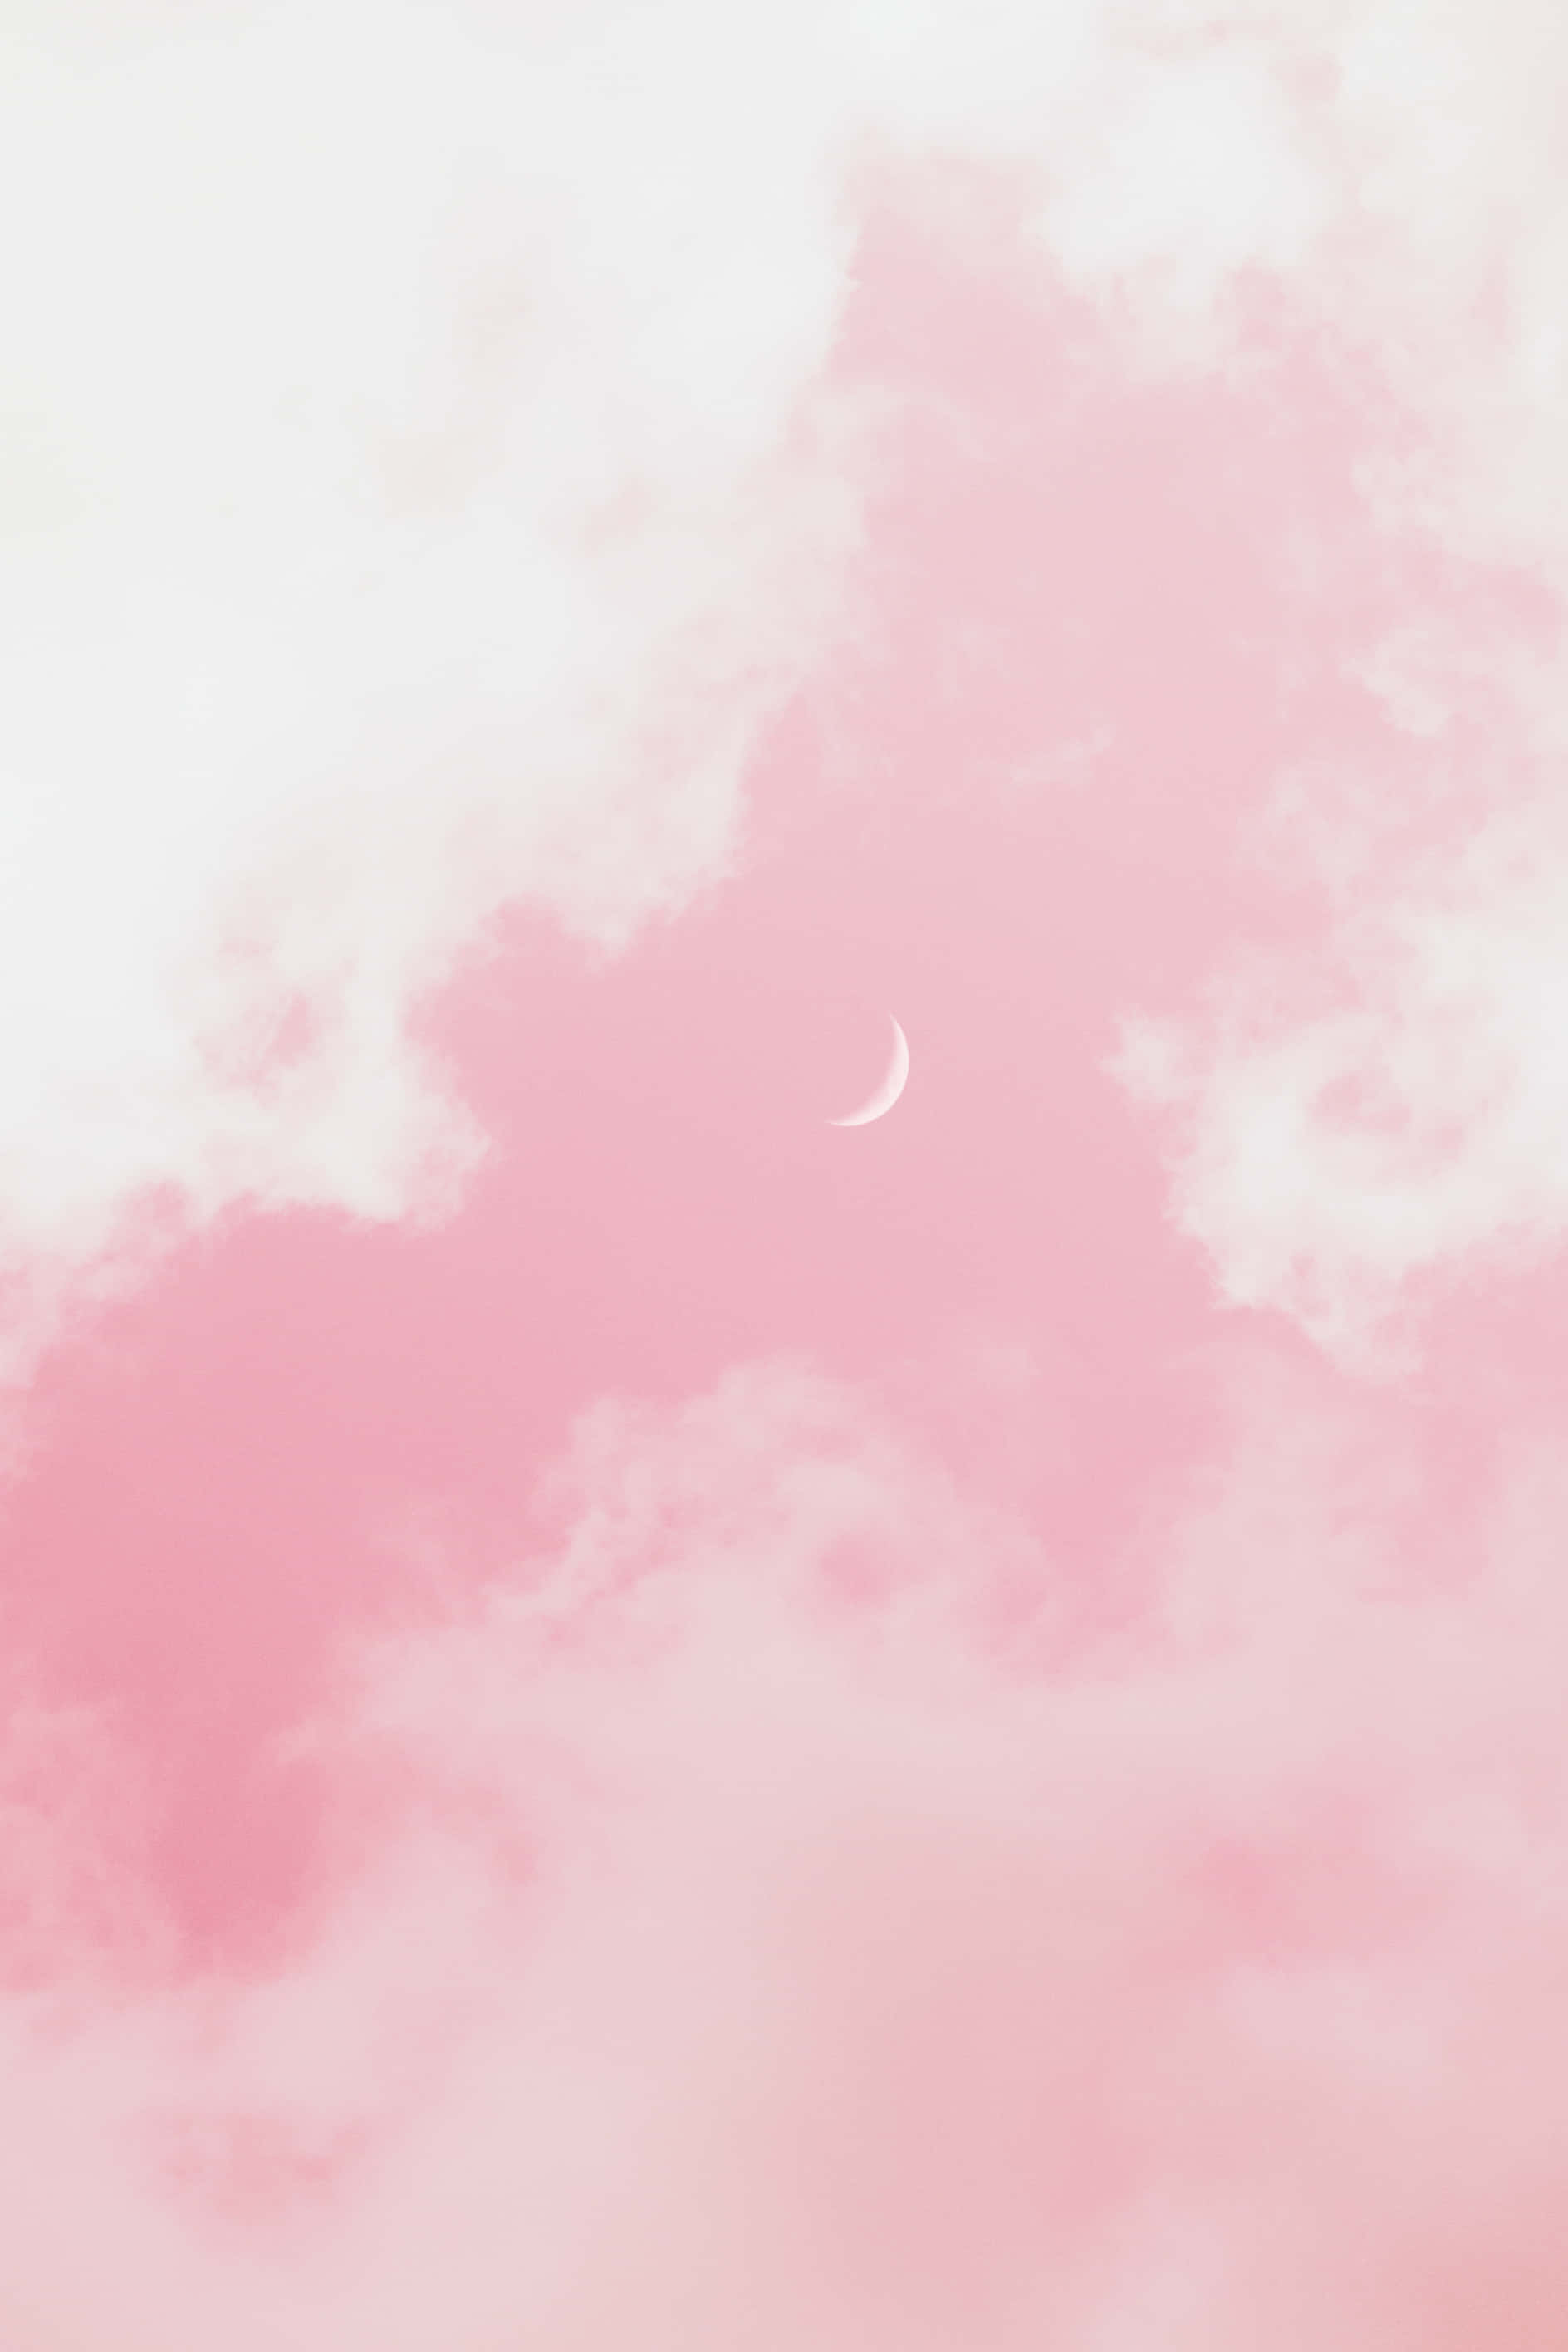 Download Pink Aesthetic Background | Wallpapers.com